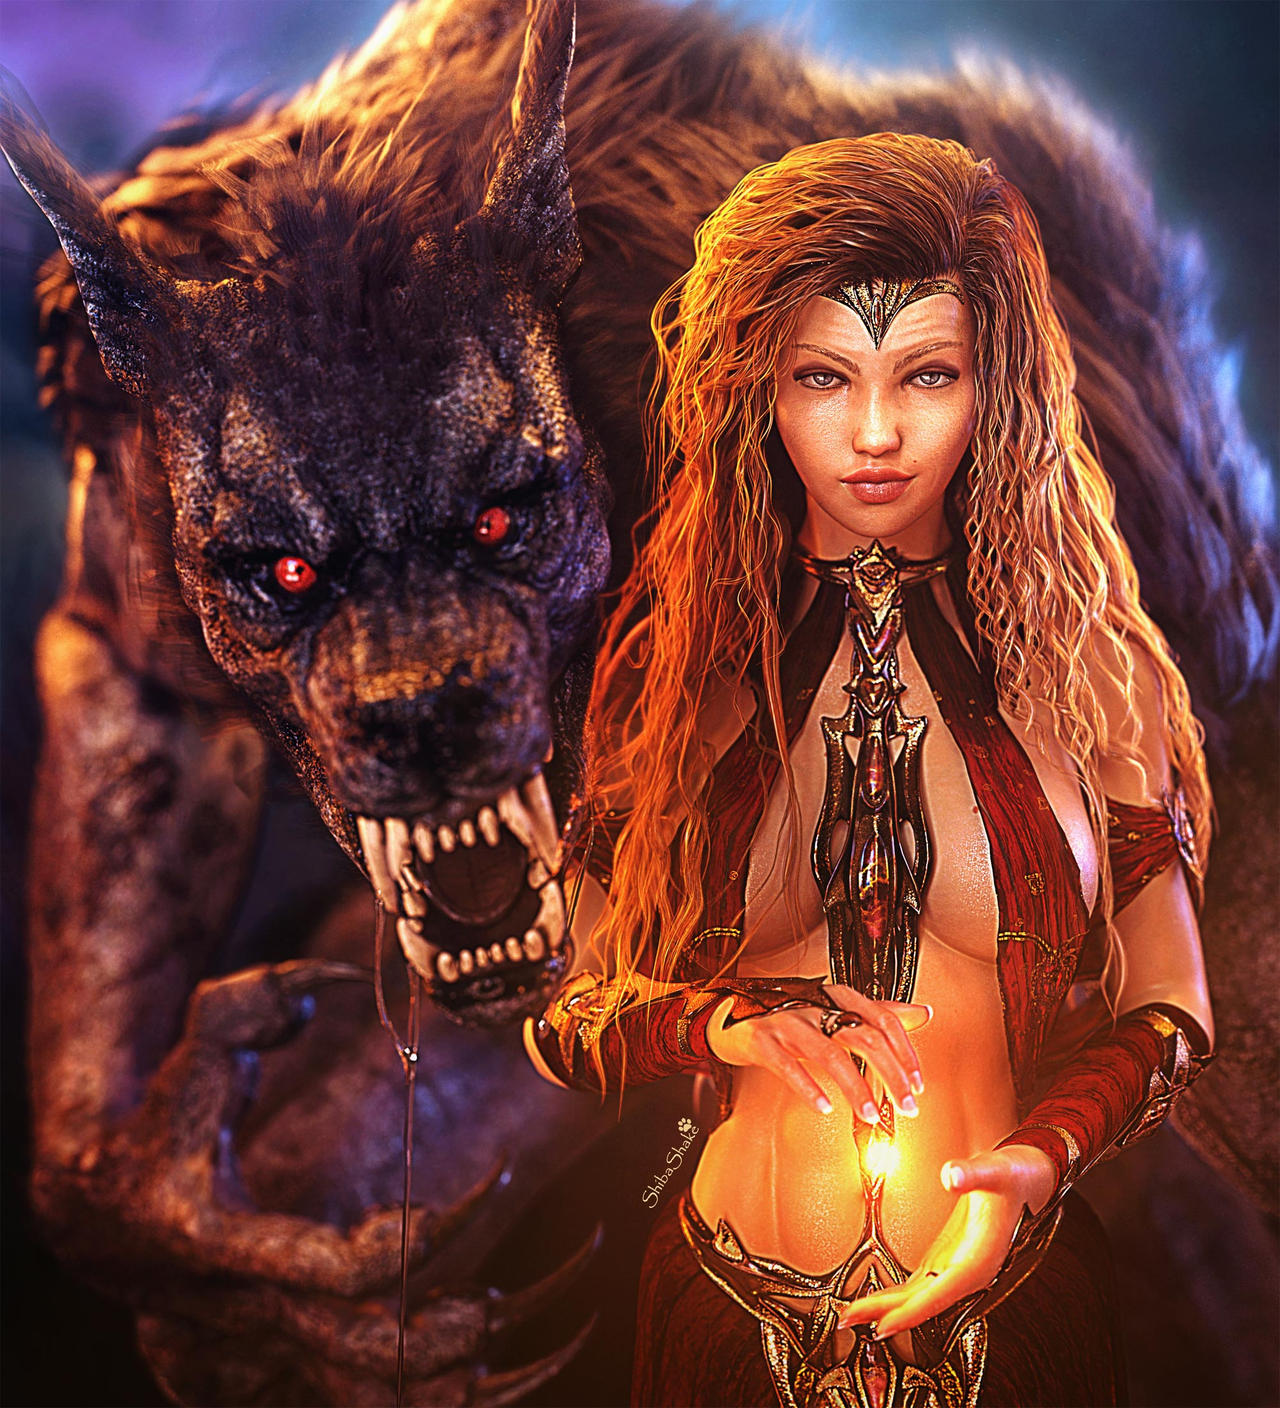 Beautiful girl with light in her hands standing next to a dark monster werewolf. Duality fantasy woman art. Daz Studio Iray image